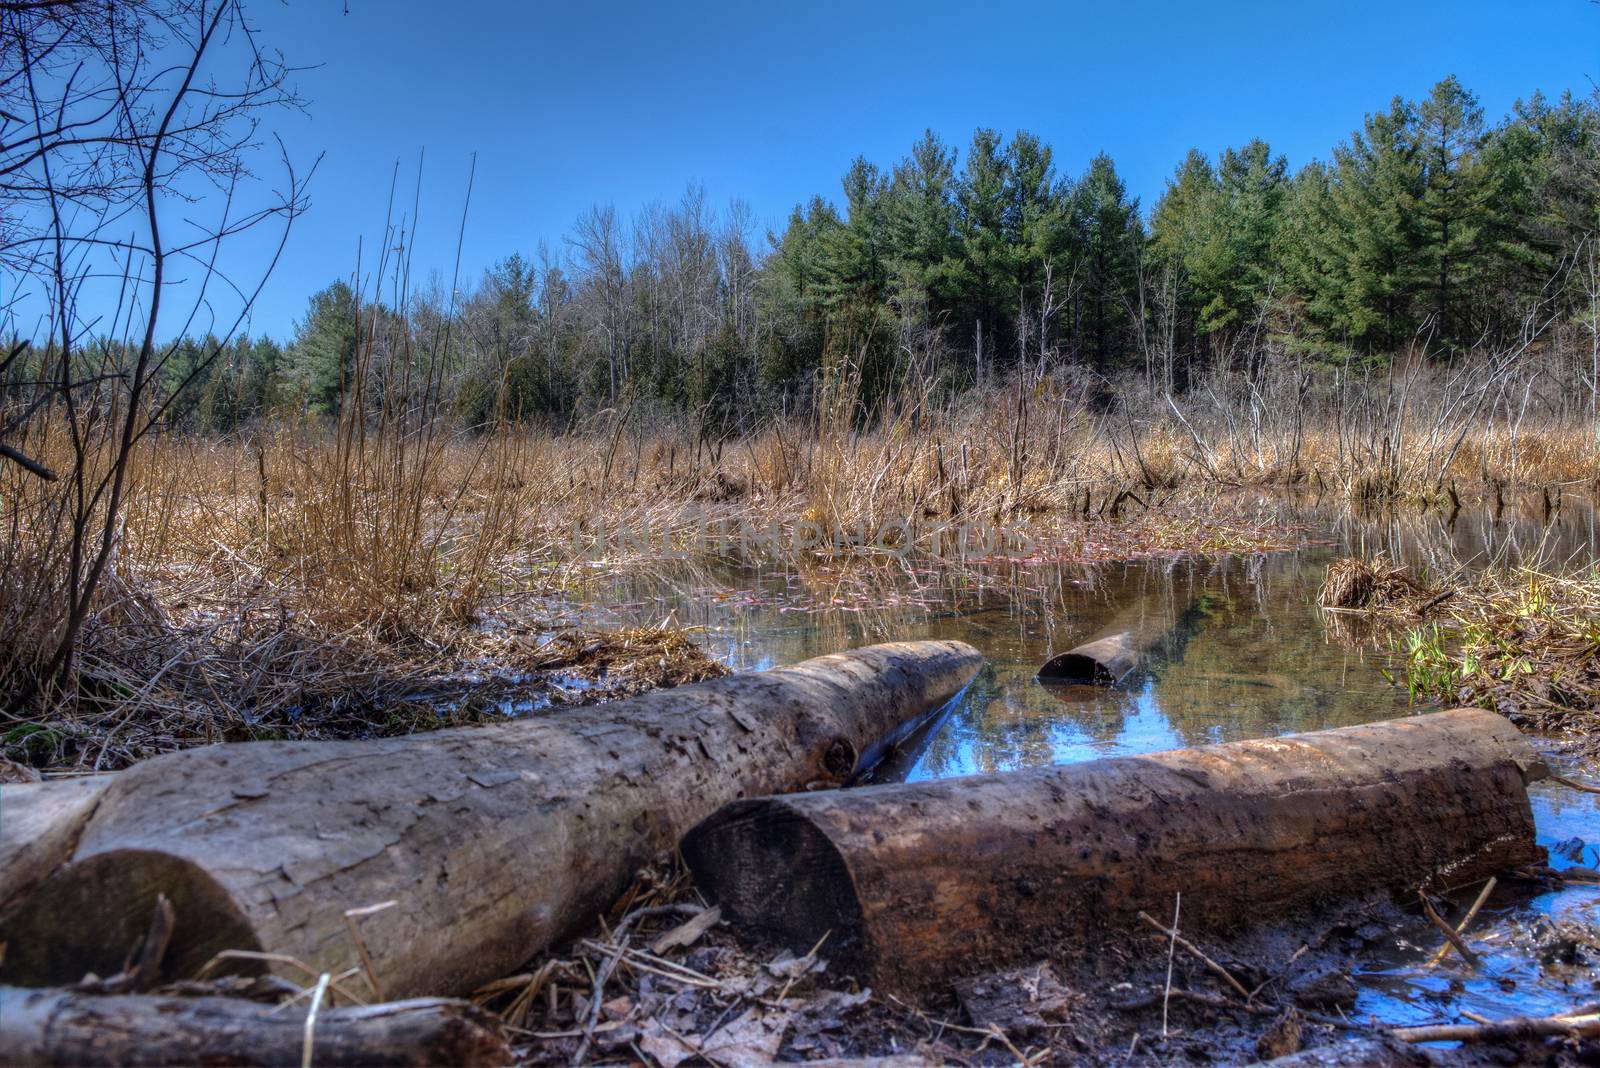 The old felled trees fell in the winter in the swamp and stayed there until the spring